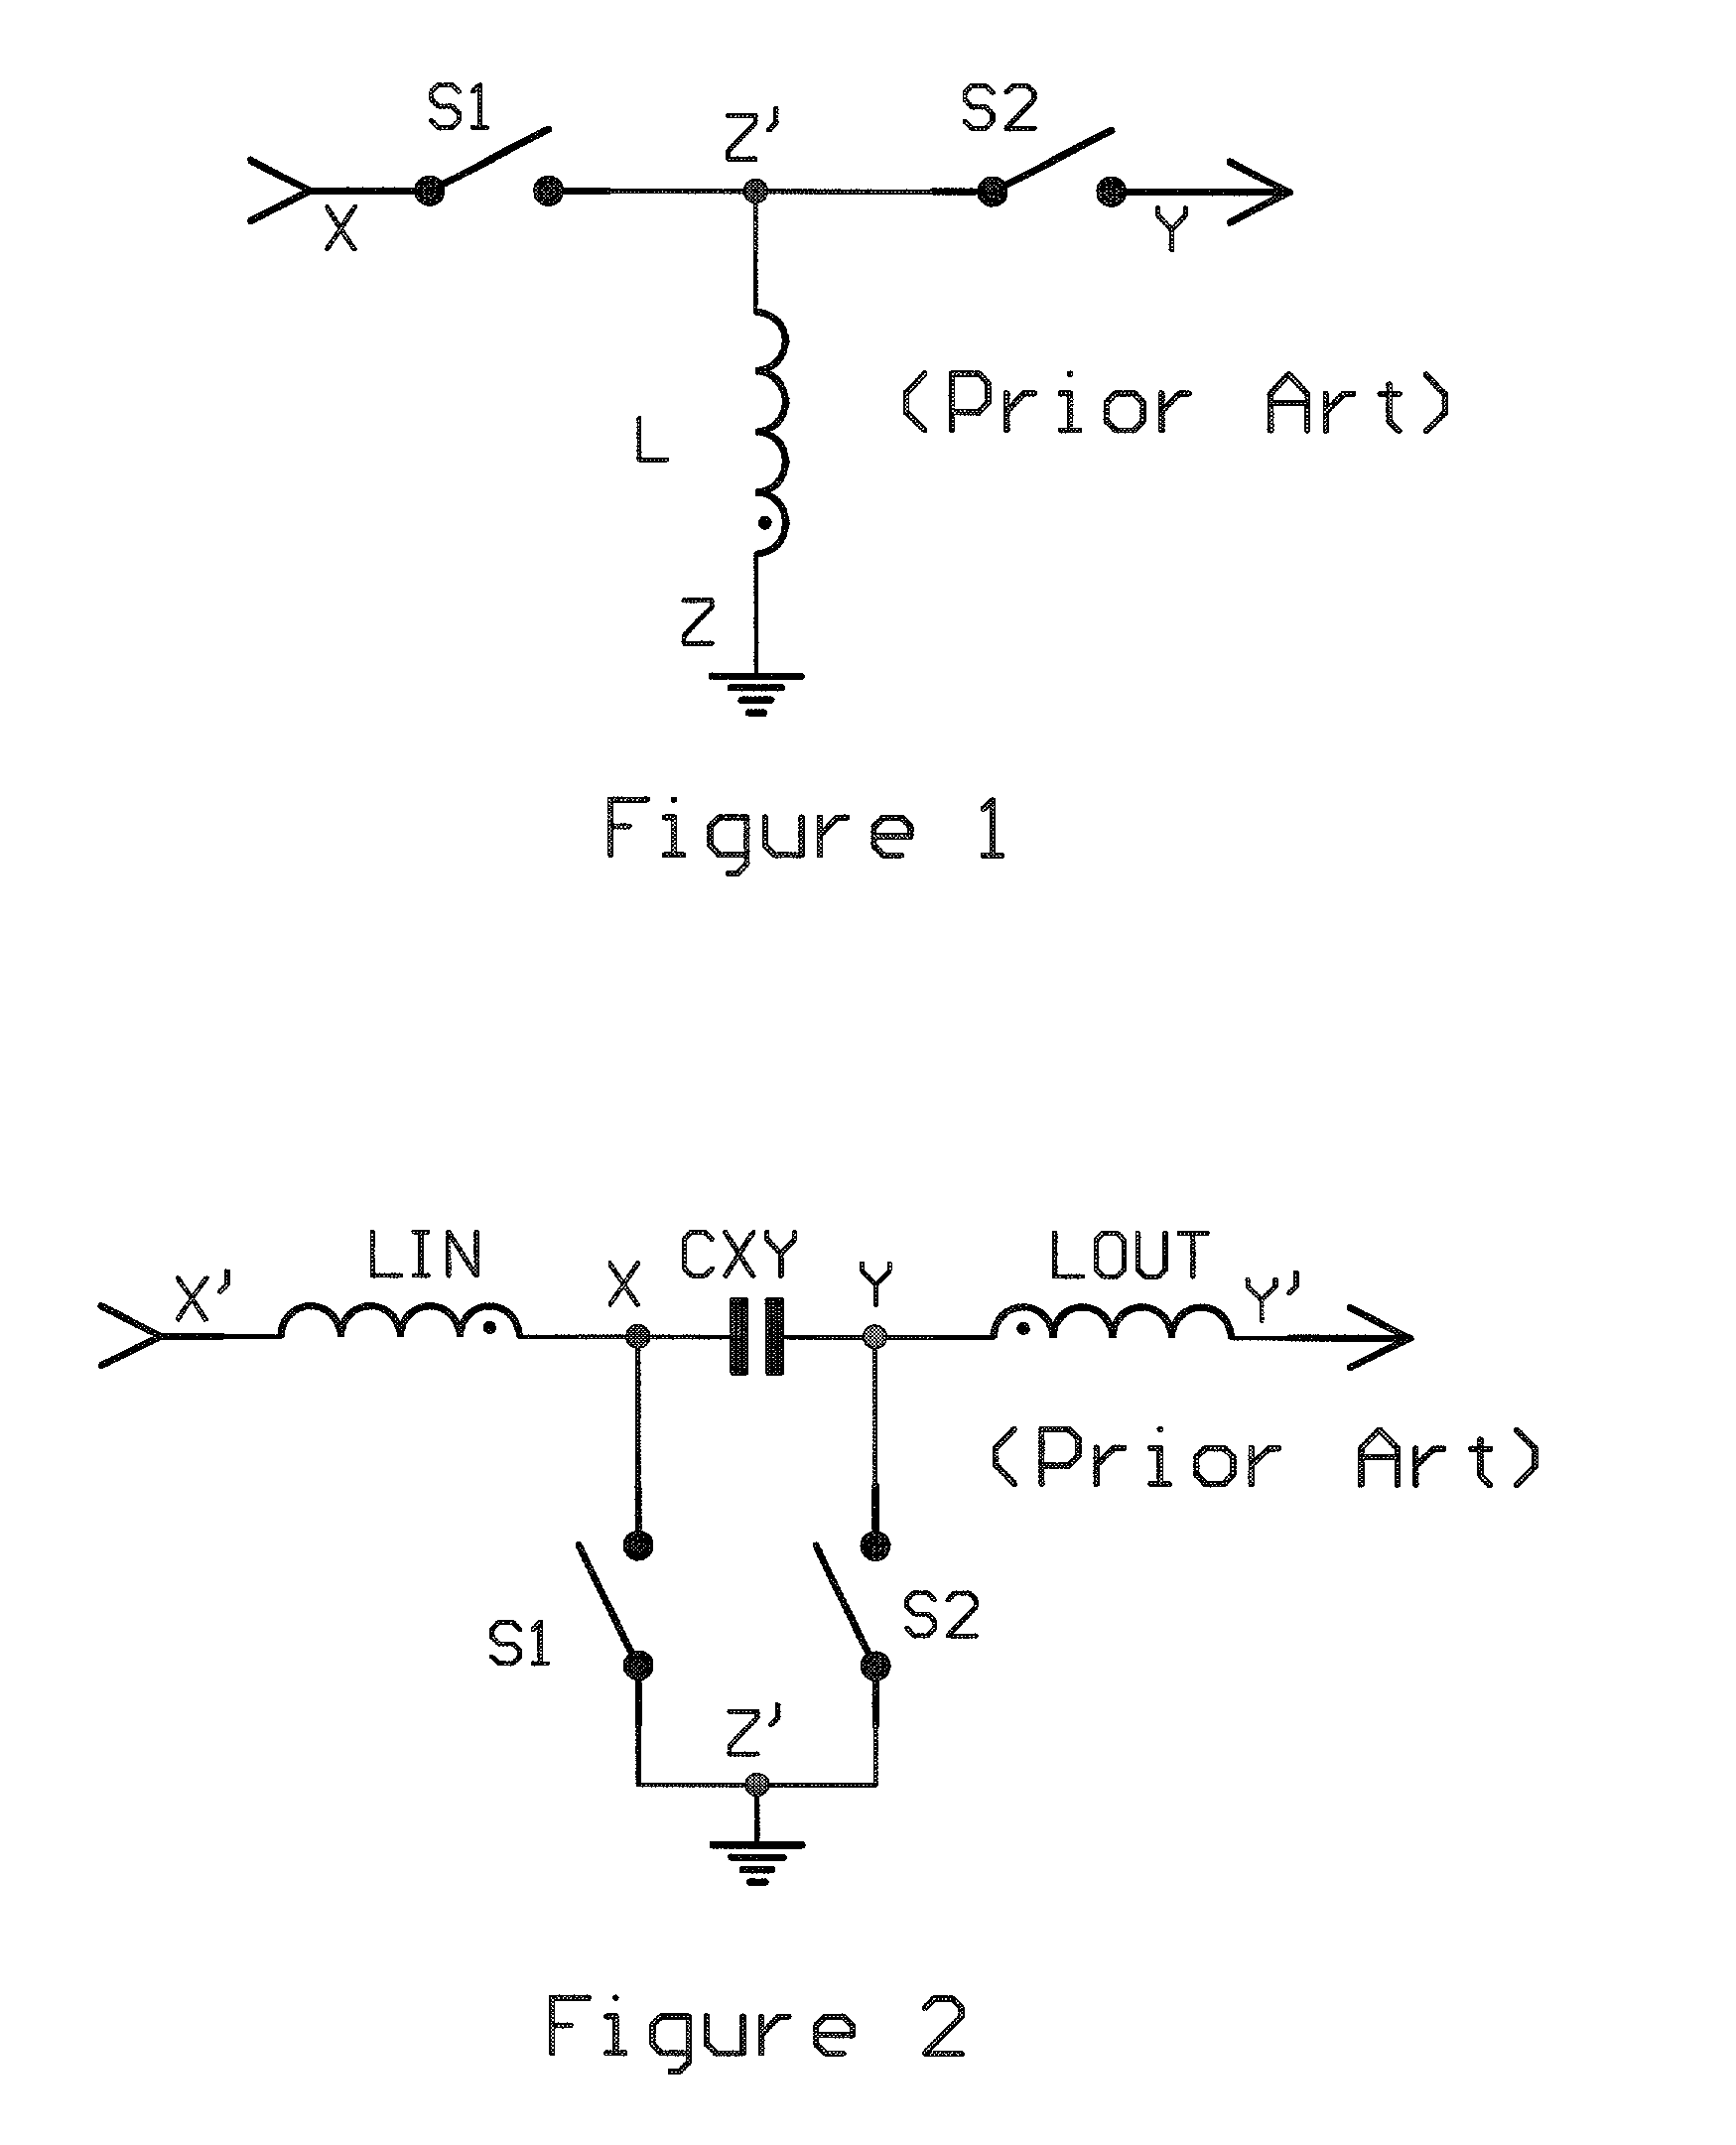 Synthesis methods for enhancing electromagnetic compatibility and ac performance of power conversion circuits